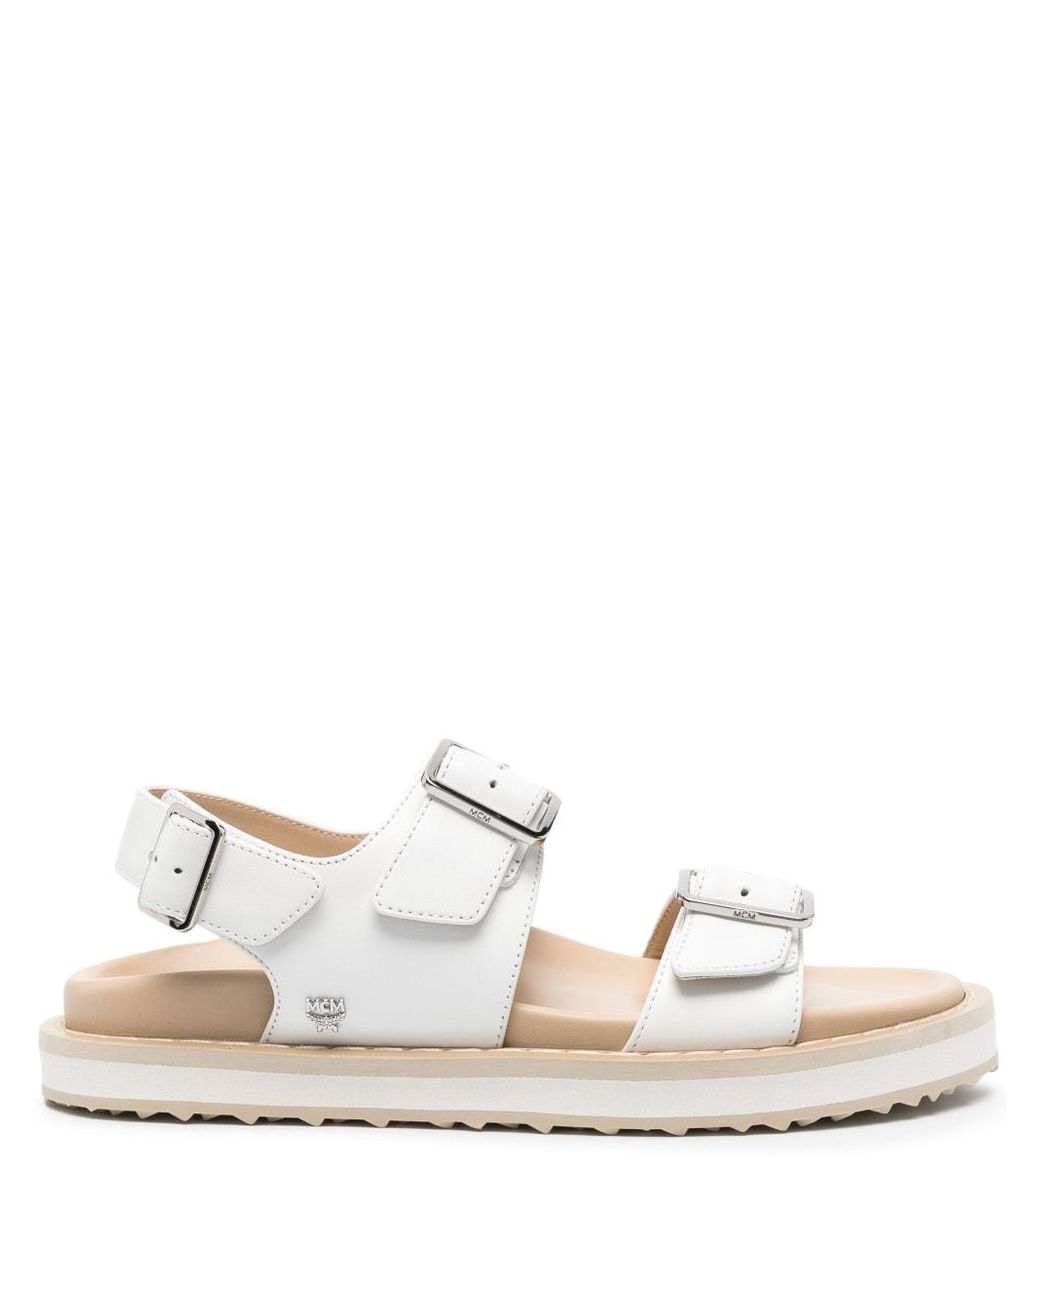 MCM Buckle-strap Slingback Sandals in Natural | Lyst